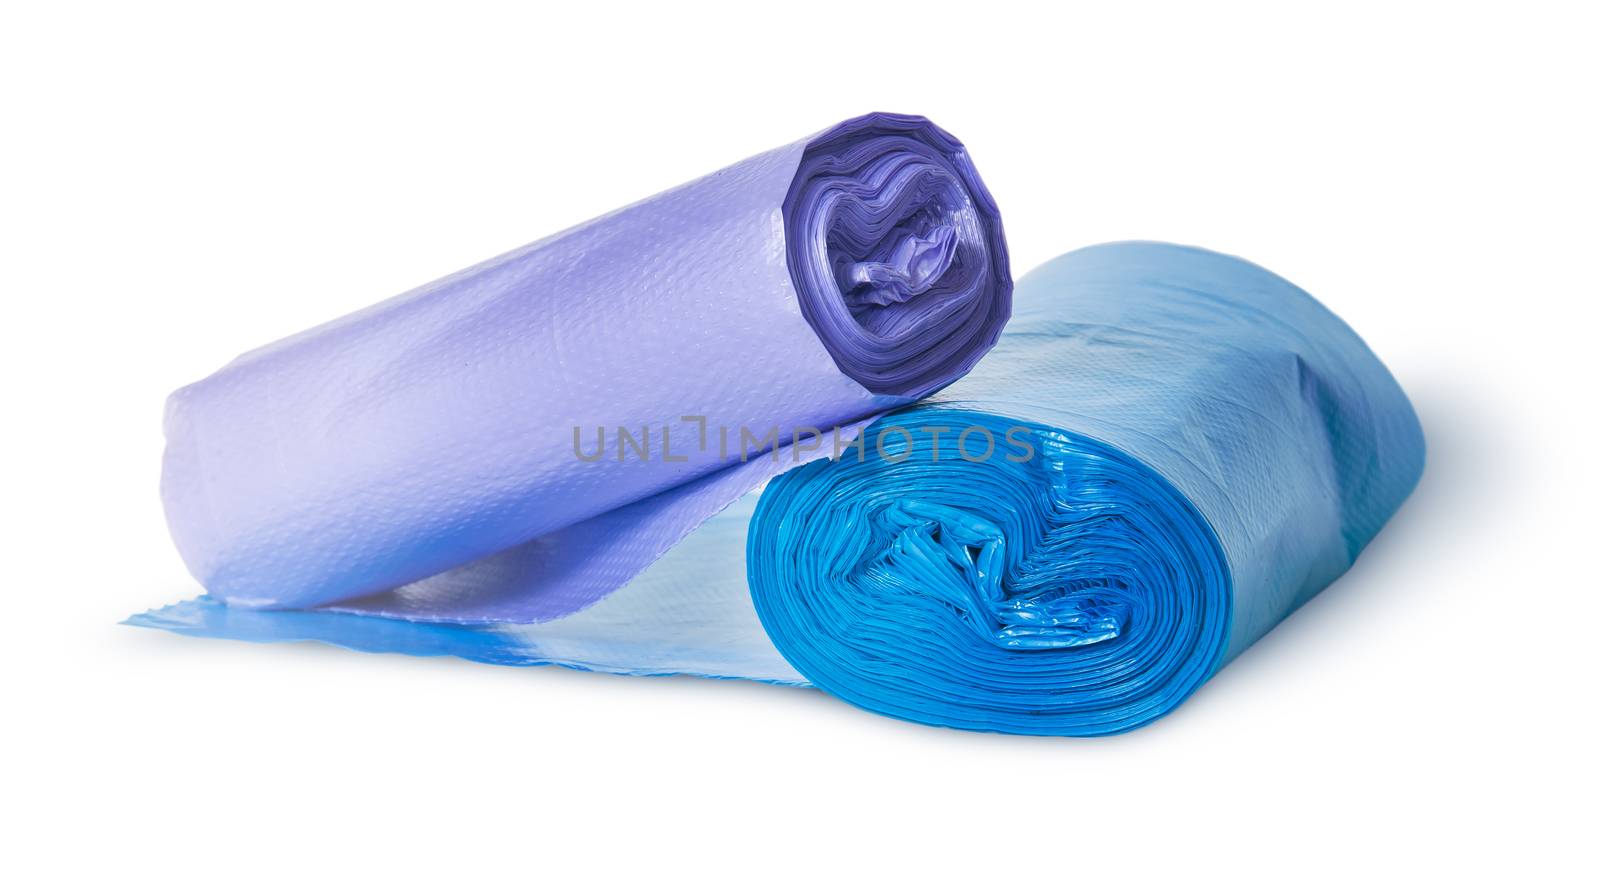 Two rolls of plastic garbage bags isolated on white background